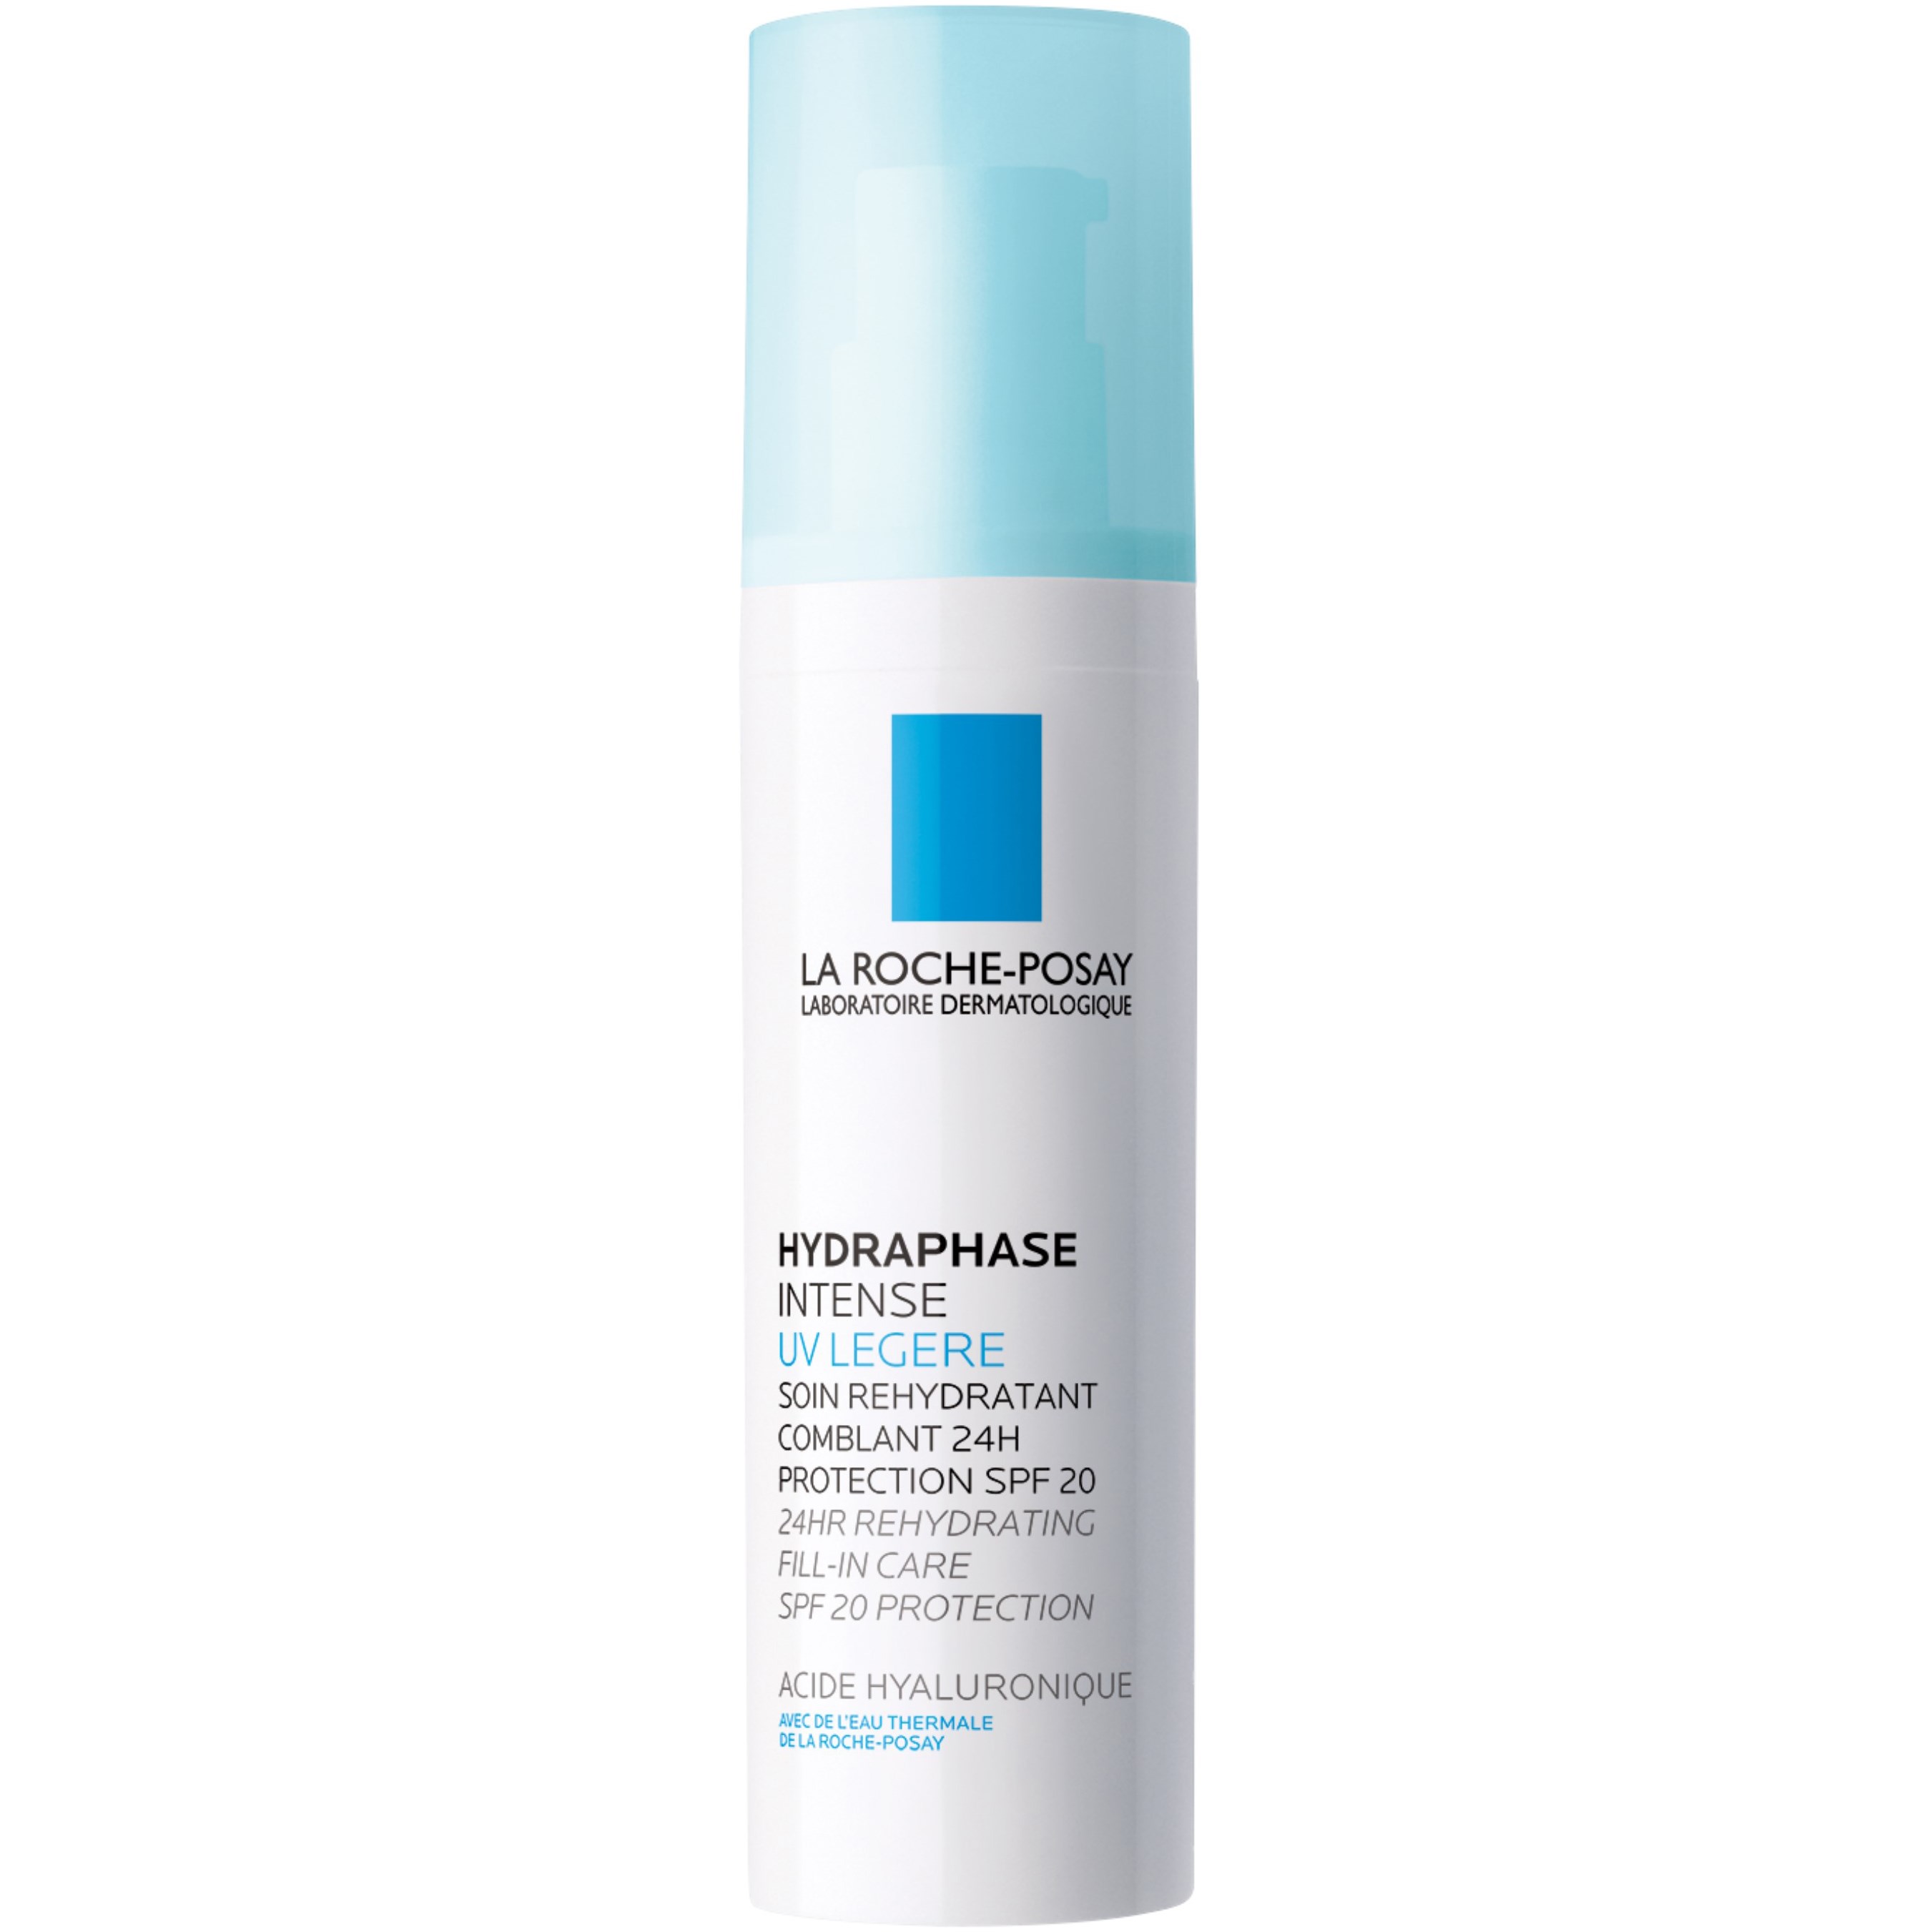 La Roche-Posay Hydraphase 24H Rehydrating Fill-in SPF20 Protection 50